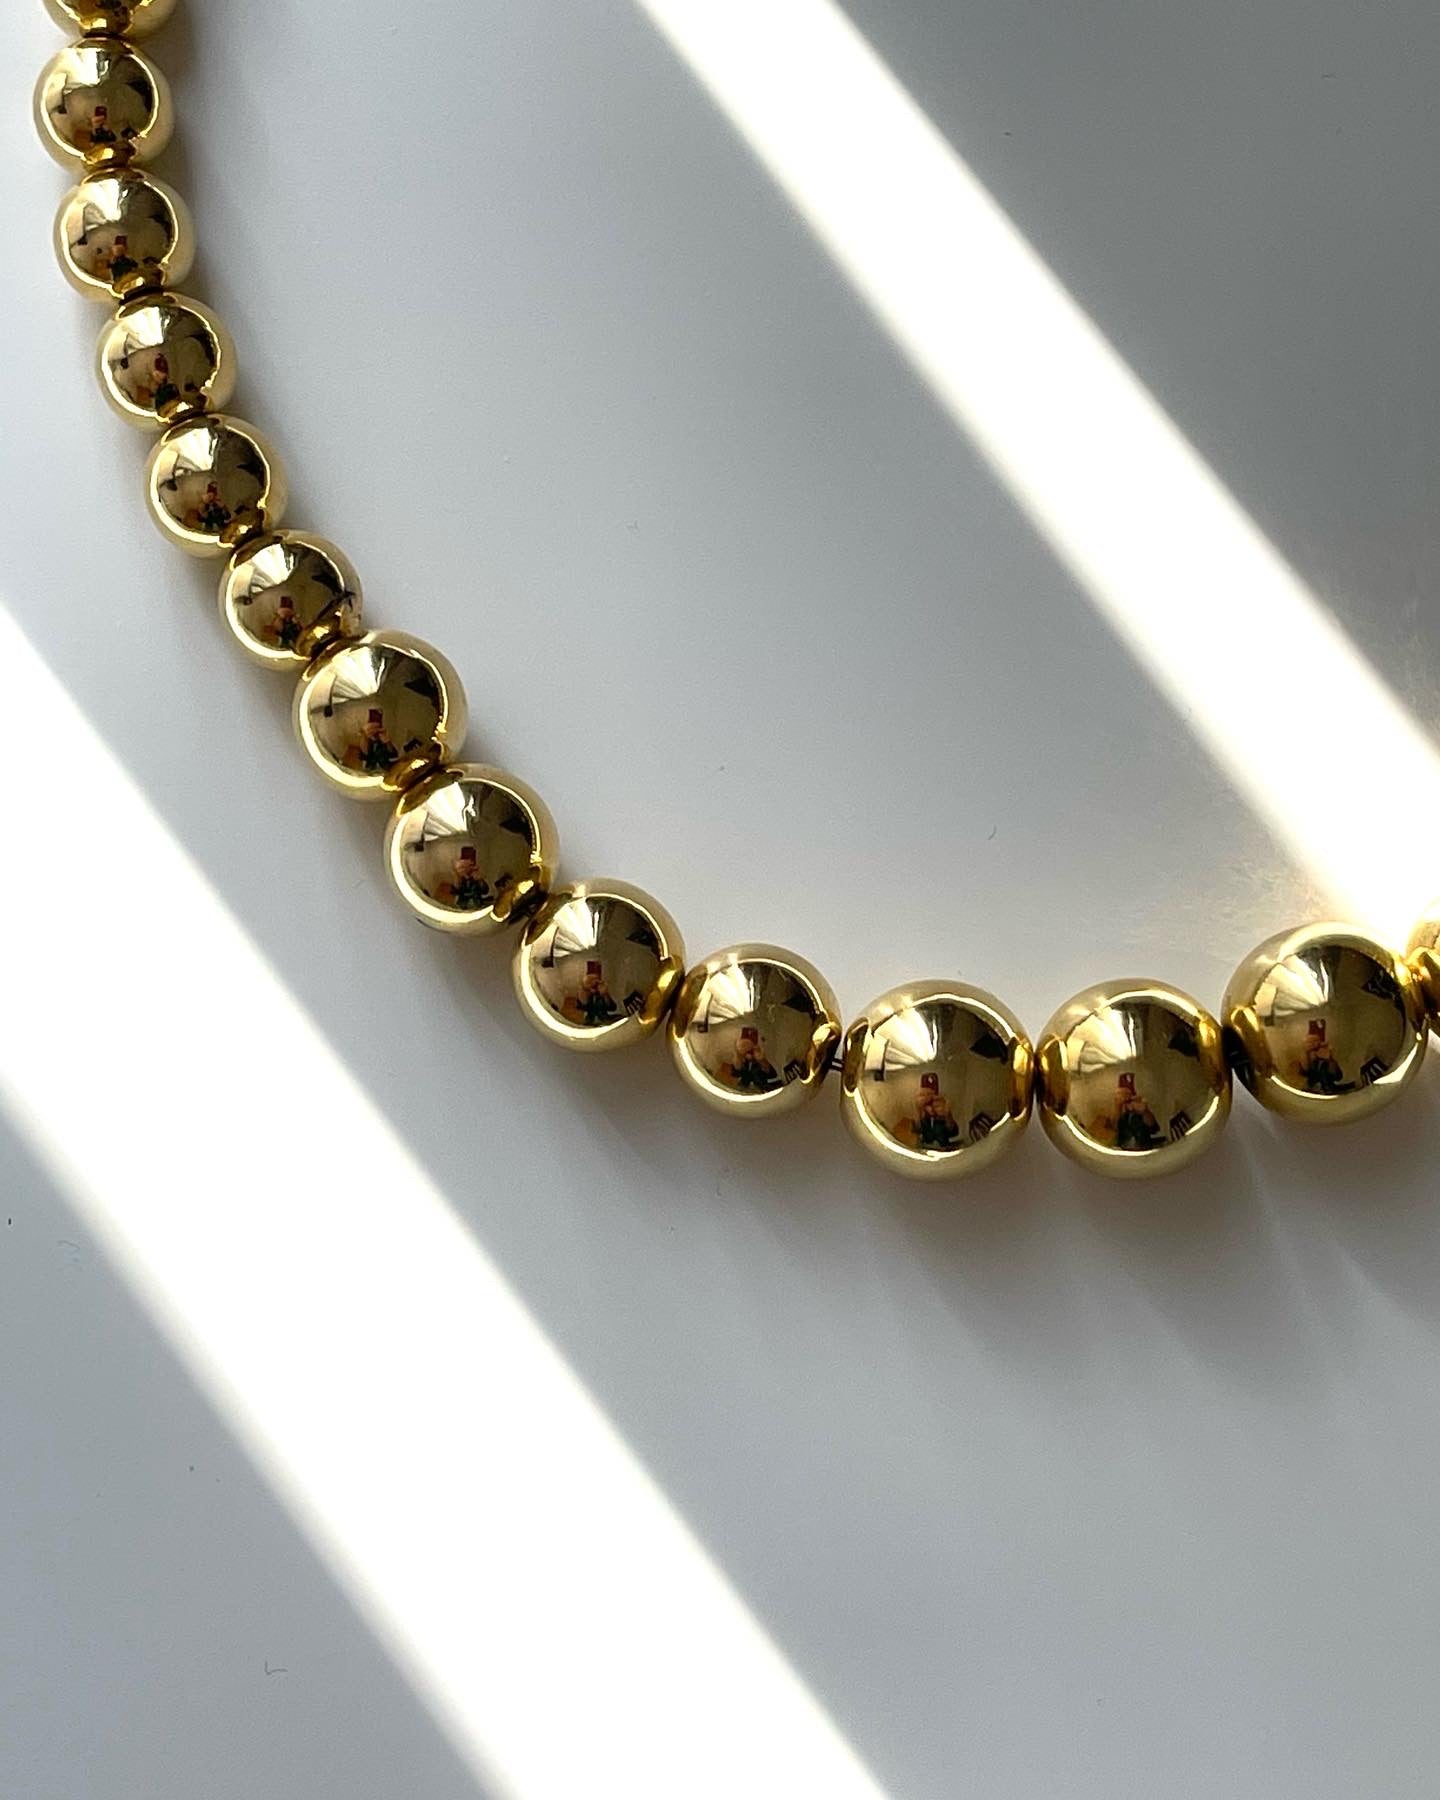 Lovely vintage gold-tone necklace in a simple beaded design (metal+plastic)